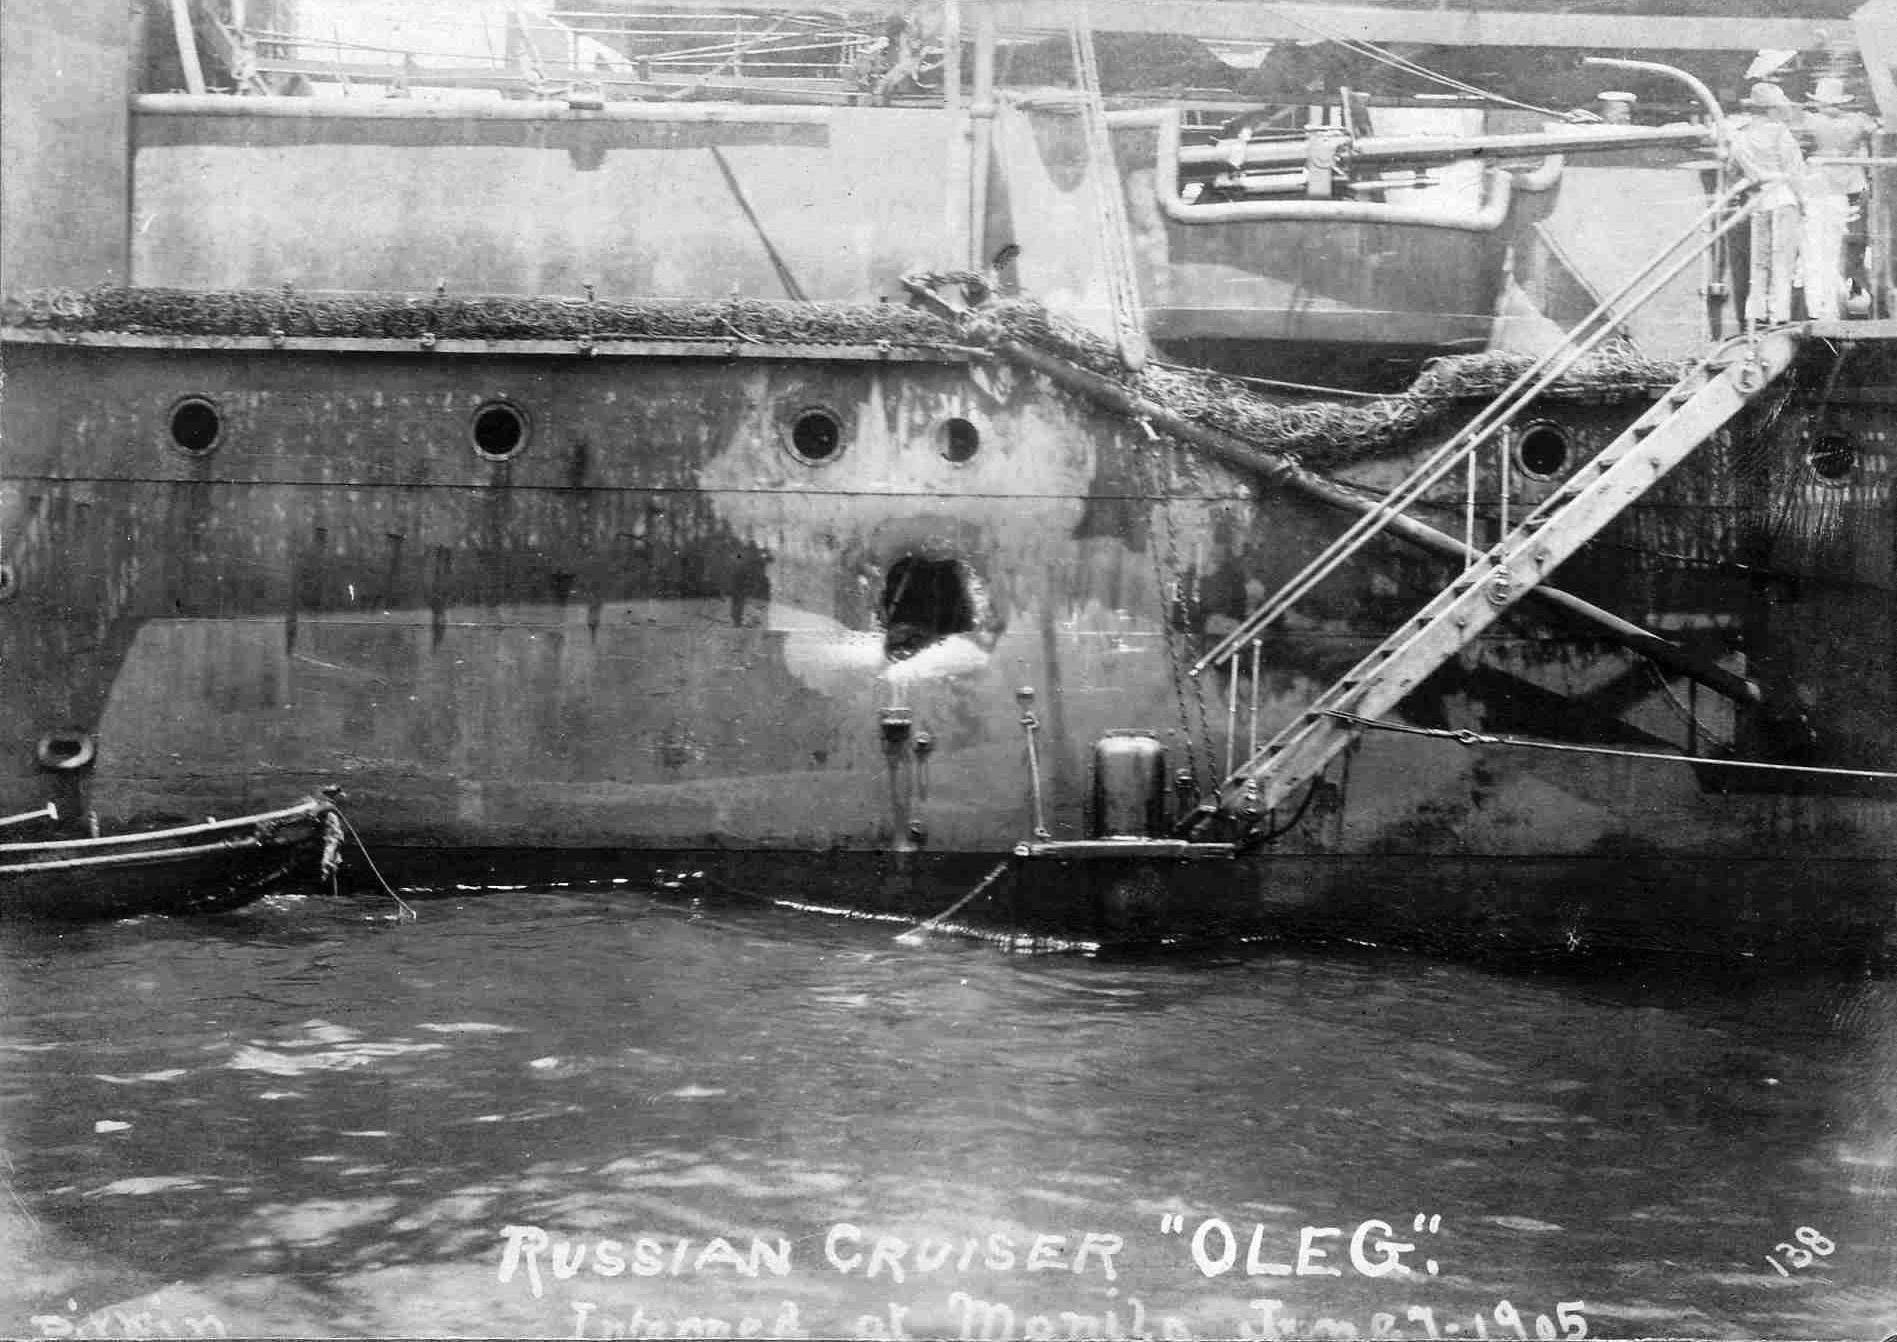 Russian protected cruiser Oleg, showing battle damage after the Battle of Tsushima. Photo taken on June 27, 1905 in Manila Bay, Philippines. Original sepia-tint photograph slightly digitally-enhanced and cleaned up. 